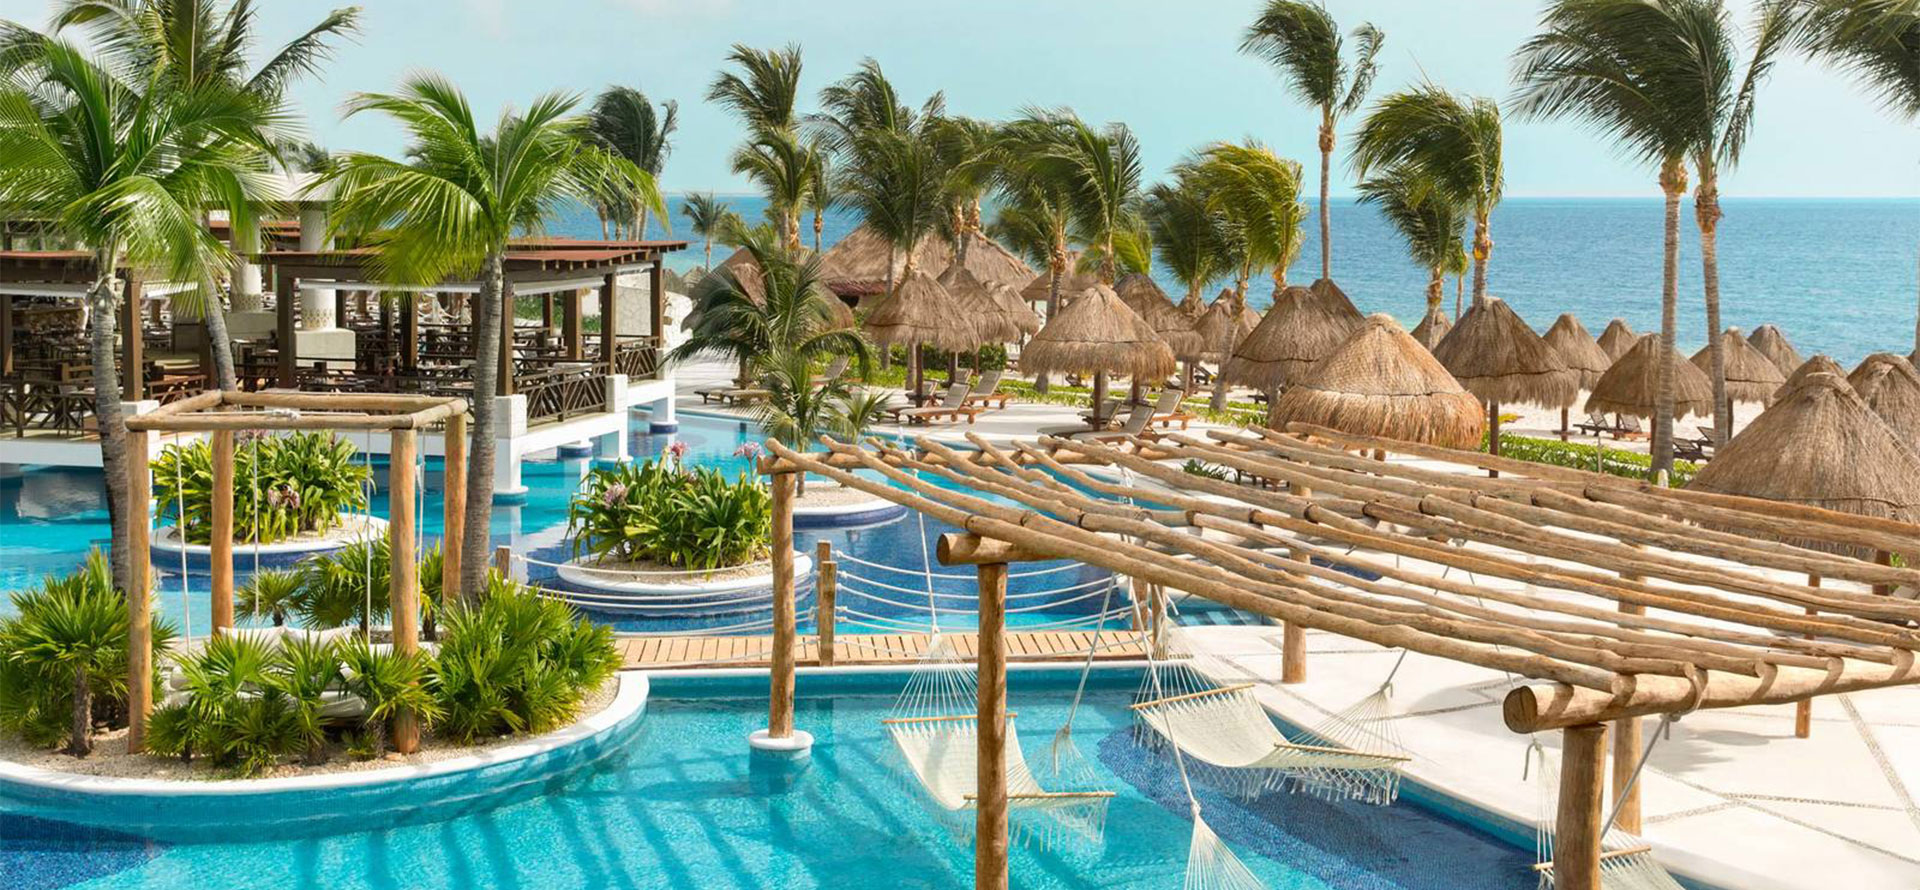 Lounge zone at the Mexico all-inclusive adults only resort.